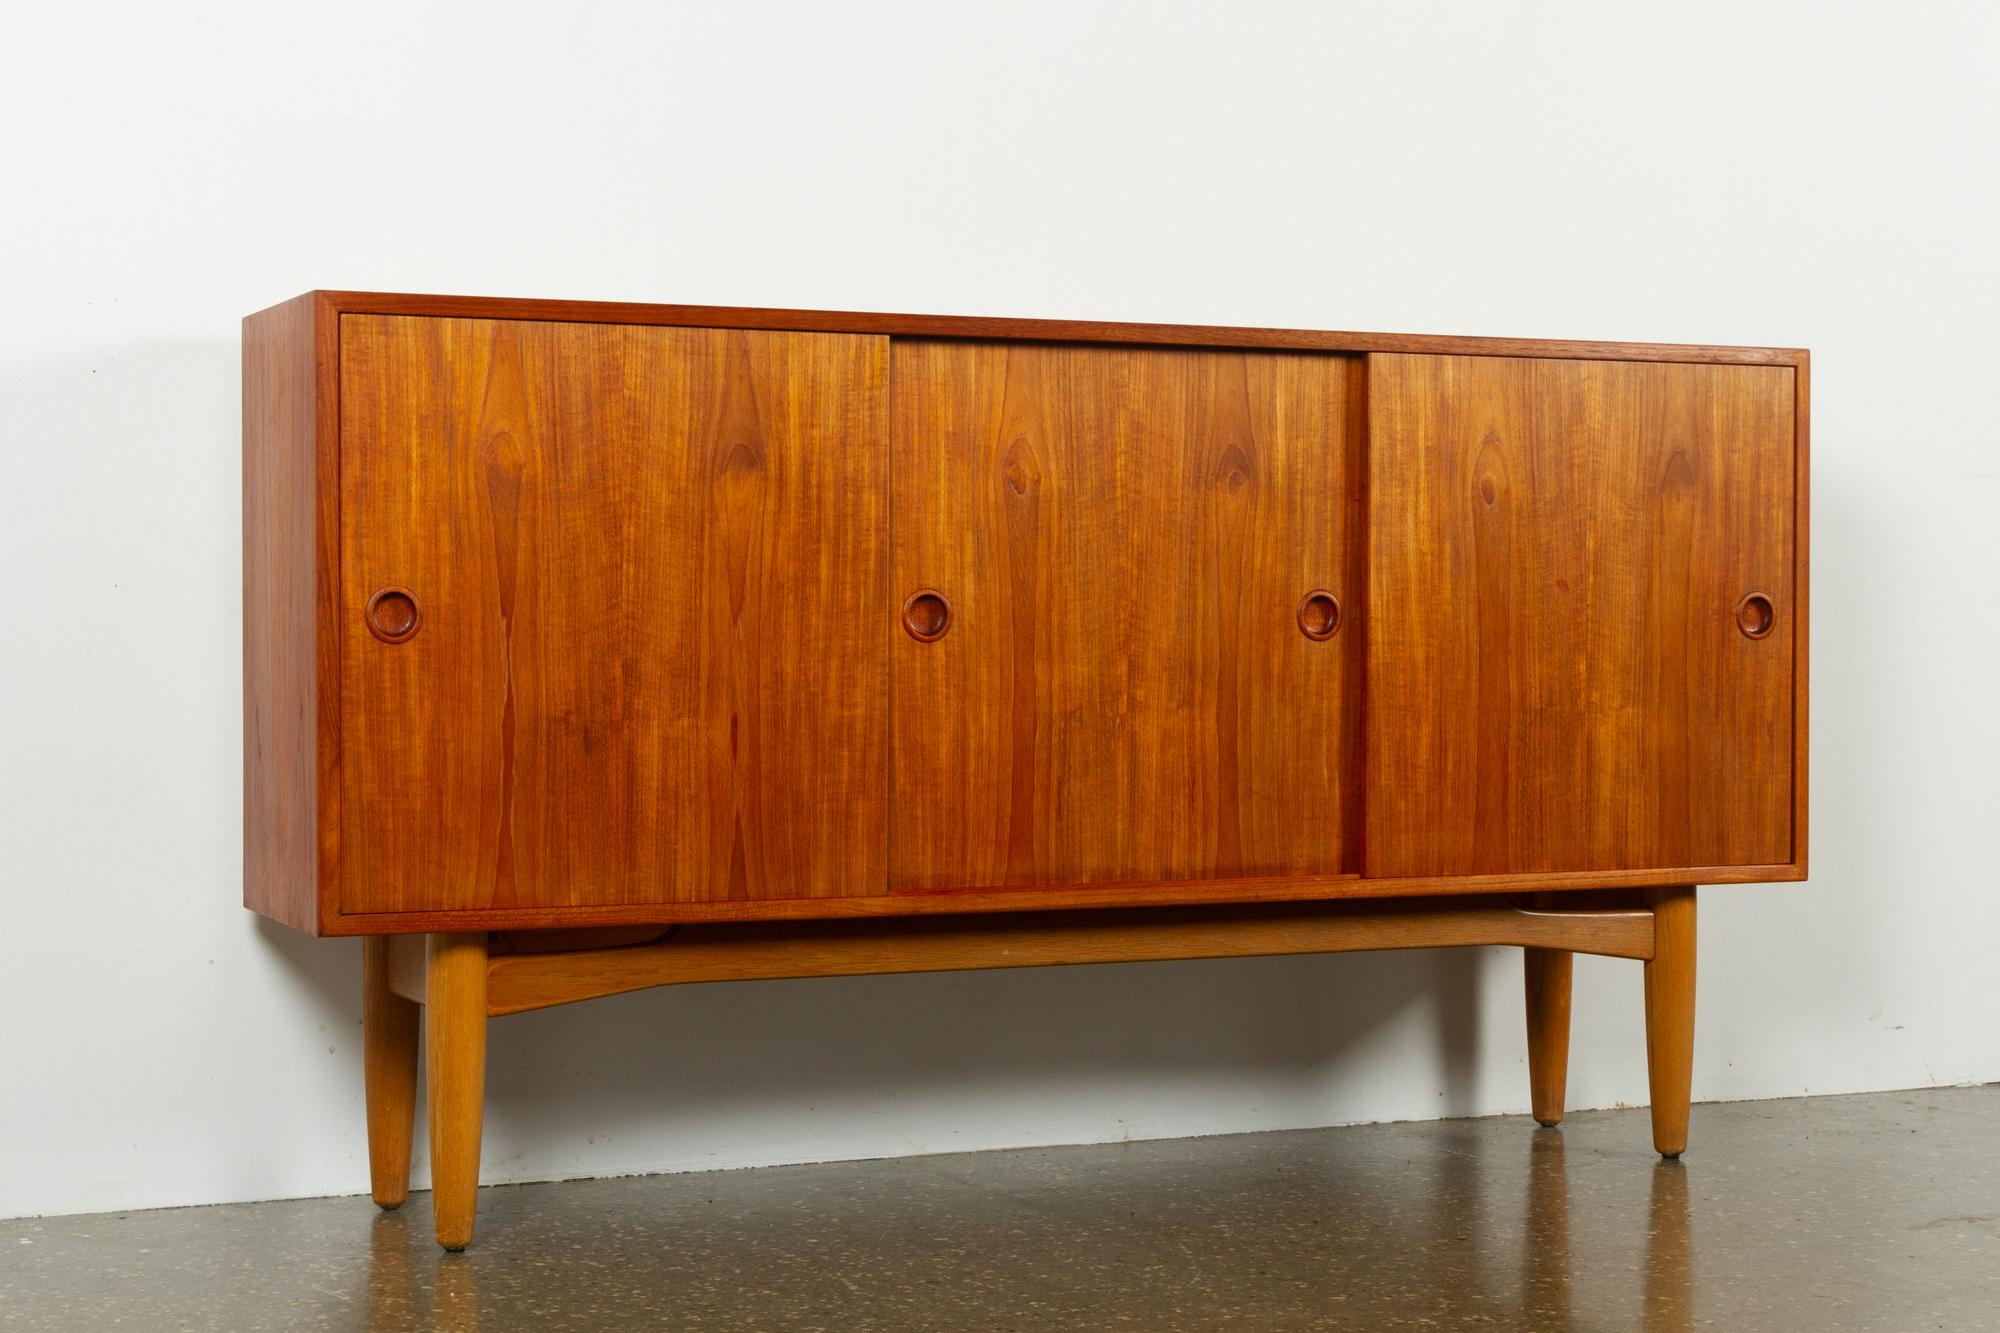 Vintage Danish teak sideboard, 1960s
Mid-Century Modern Danish lowboard with three sliding doors. Round embedded grips in solid teak. Behind doors are two compartments, one narrow and one wide, each with two height adjustable shelves. 
Inside of